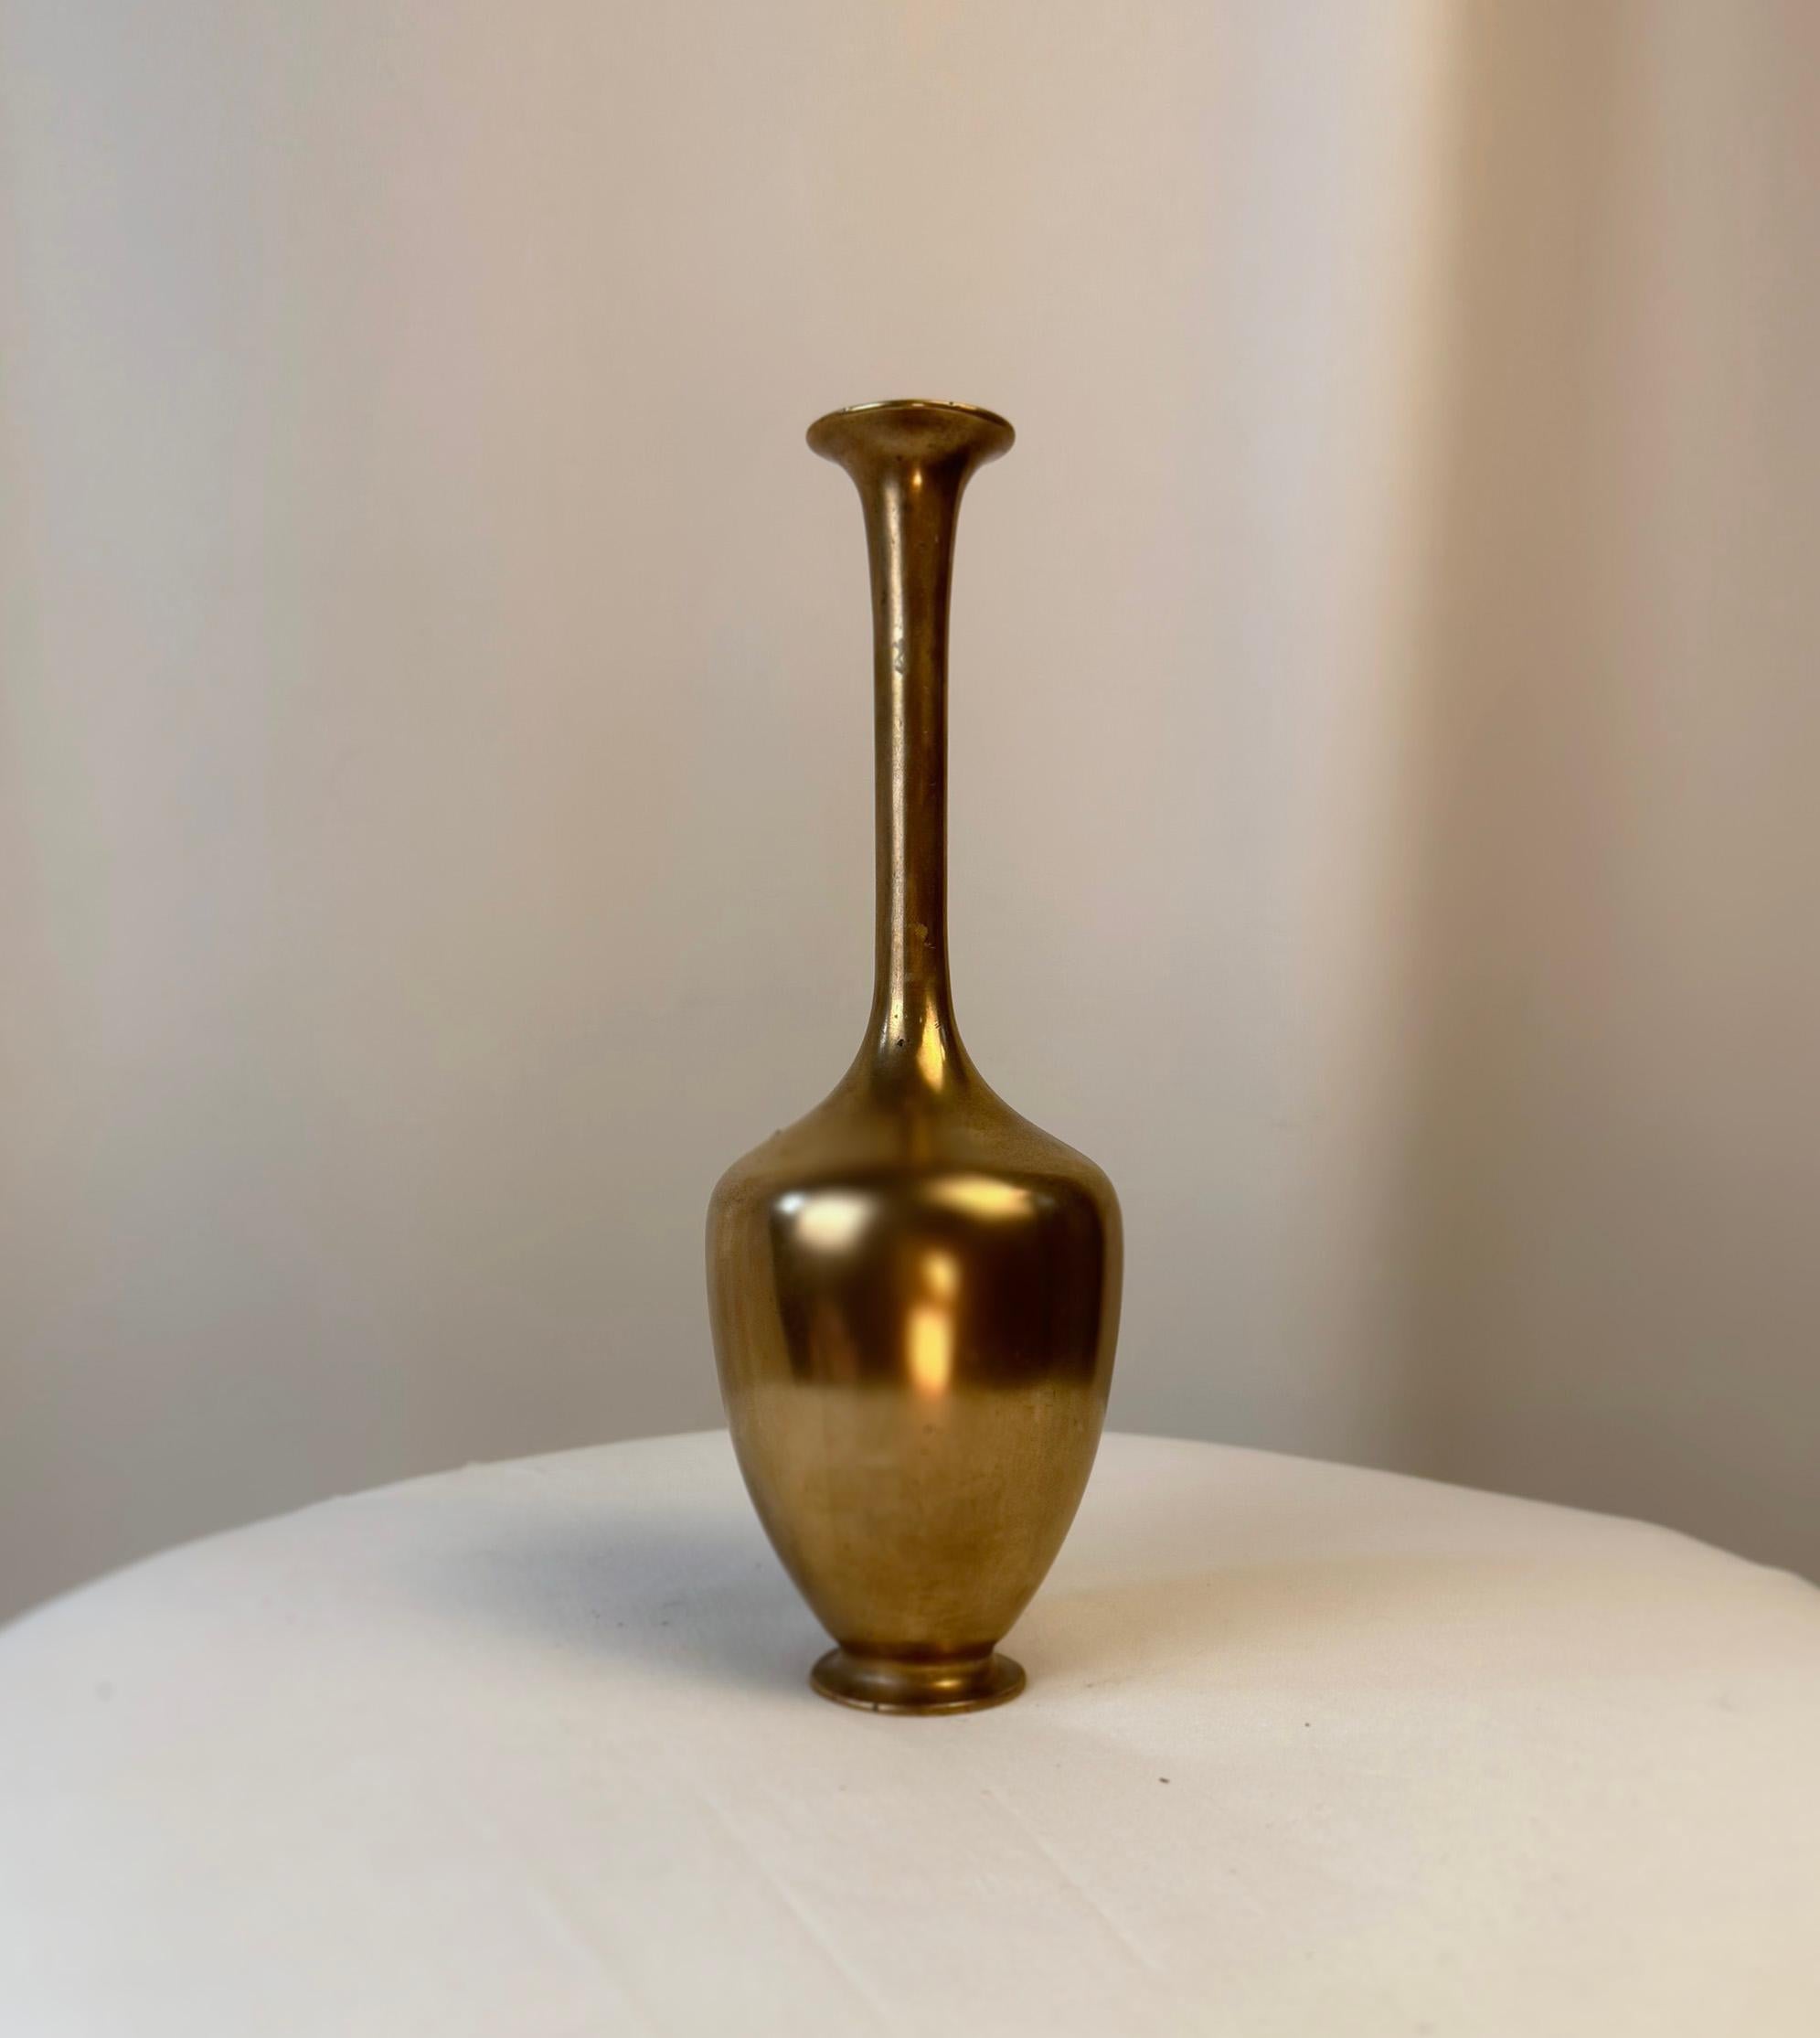 Introducing a captivating piece of Japanese artistry – a small Meiji period copper ikebana bud vase, created by the renowned artisan Genryusai Seiya.

This exquisite vase is a testament to the refined craftsmanship of the Meiji era, a period known